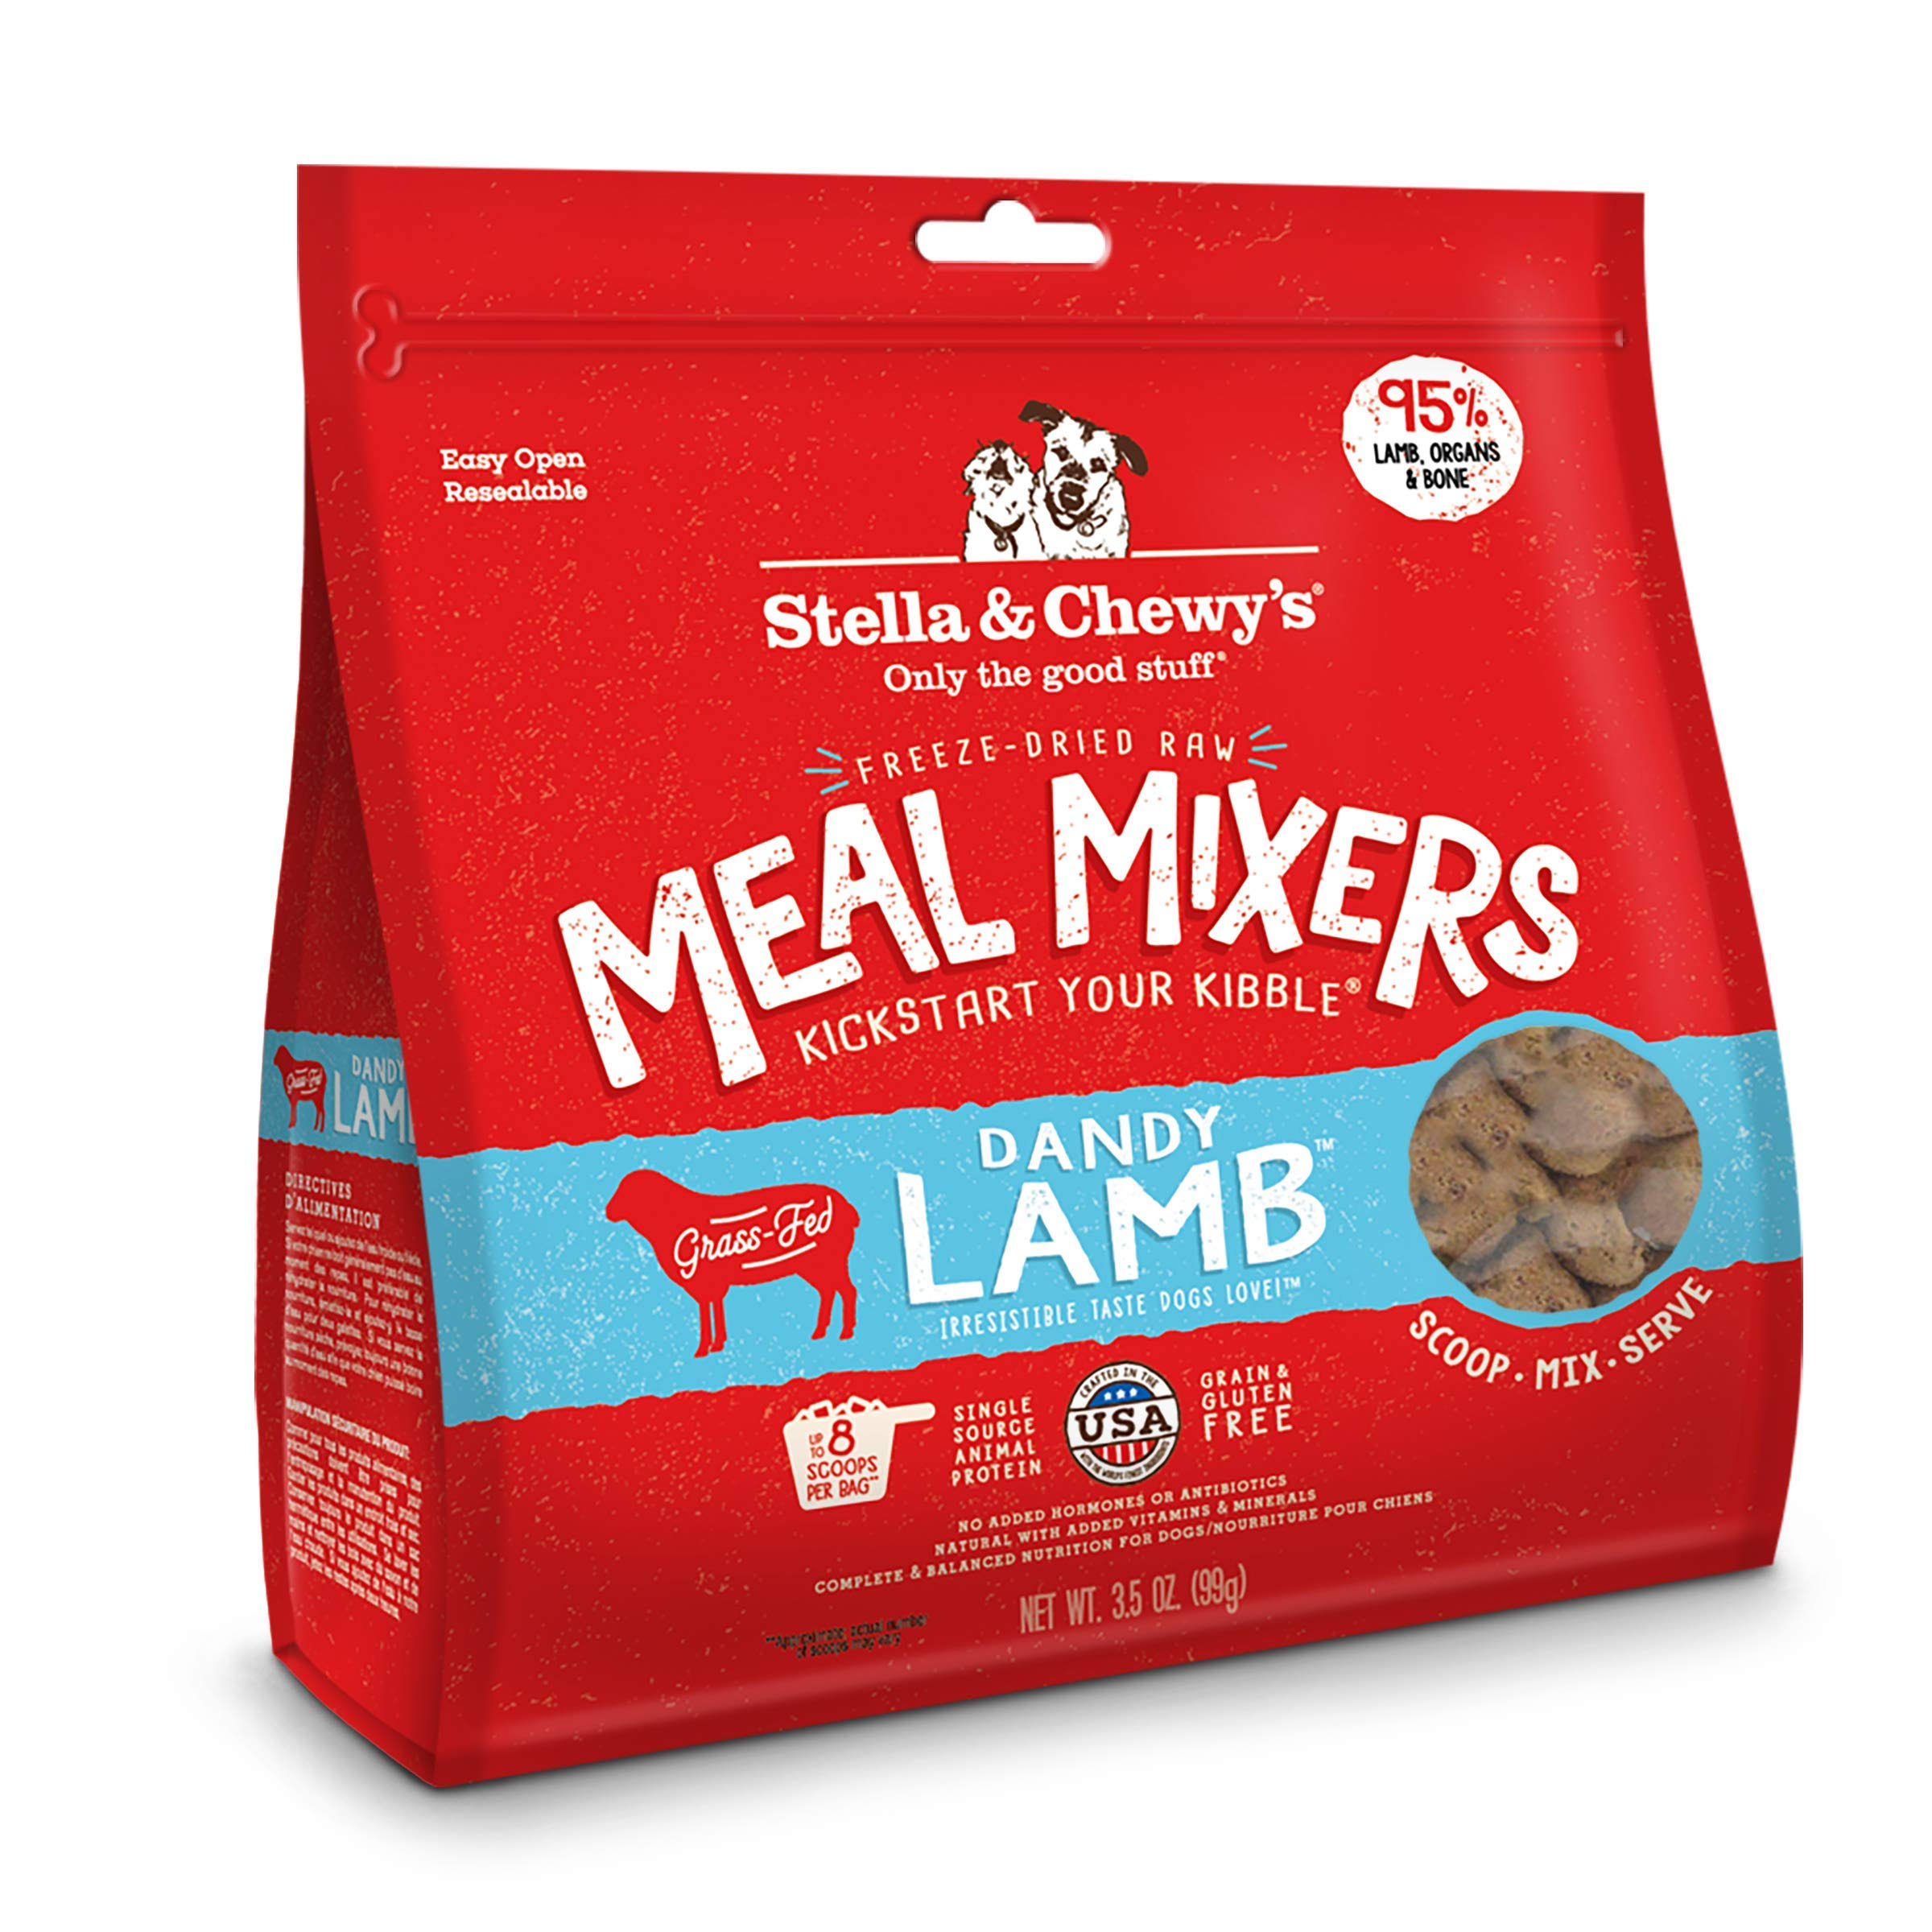 Stella & Chewy's Dog Freeze Dried Dandy Lamb Meal Mixers (3.5oz)